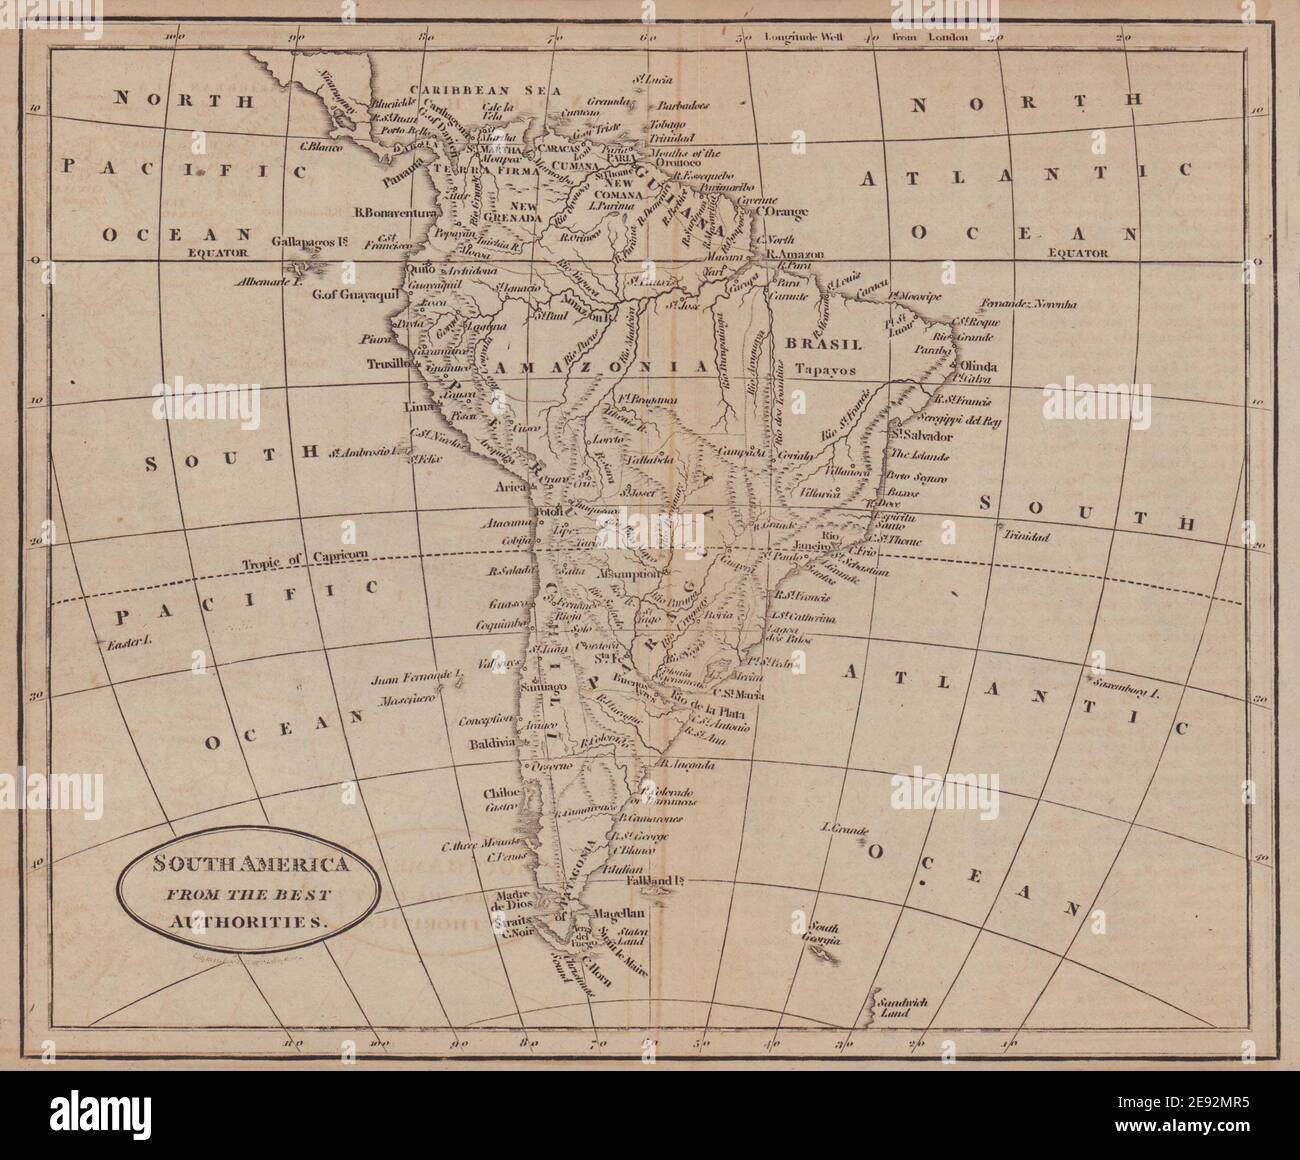 South America from the best authorities by Richard Brookes 1812 old map Stock Photo